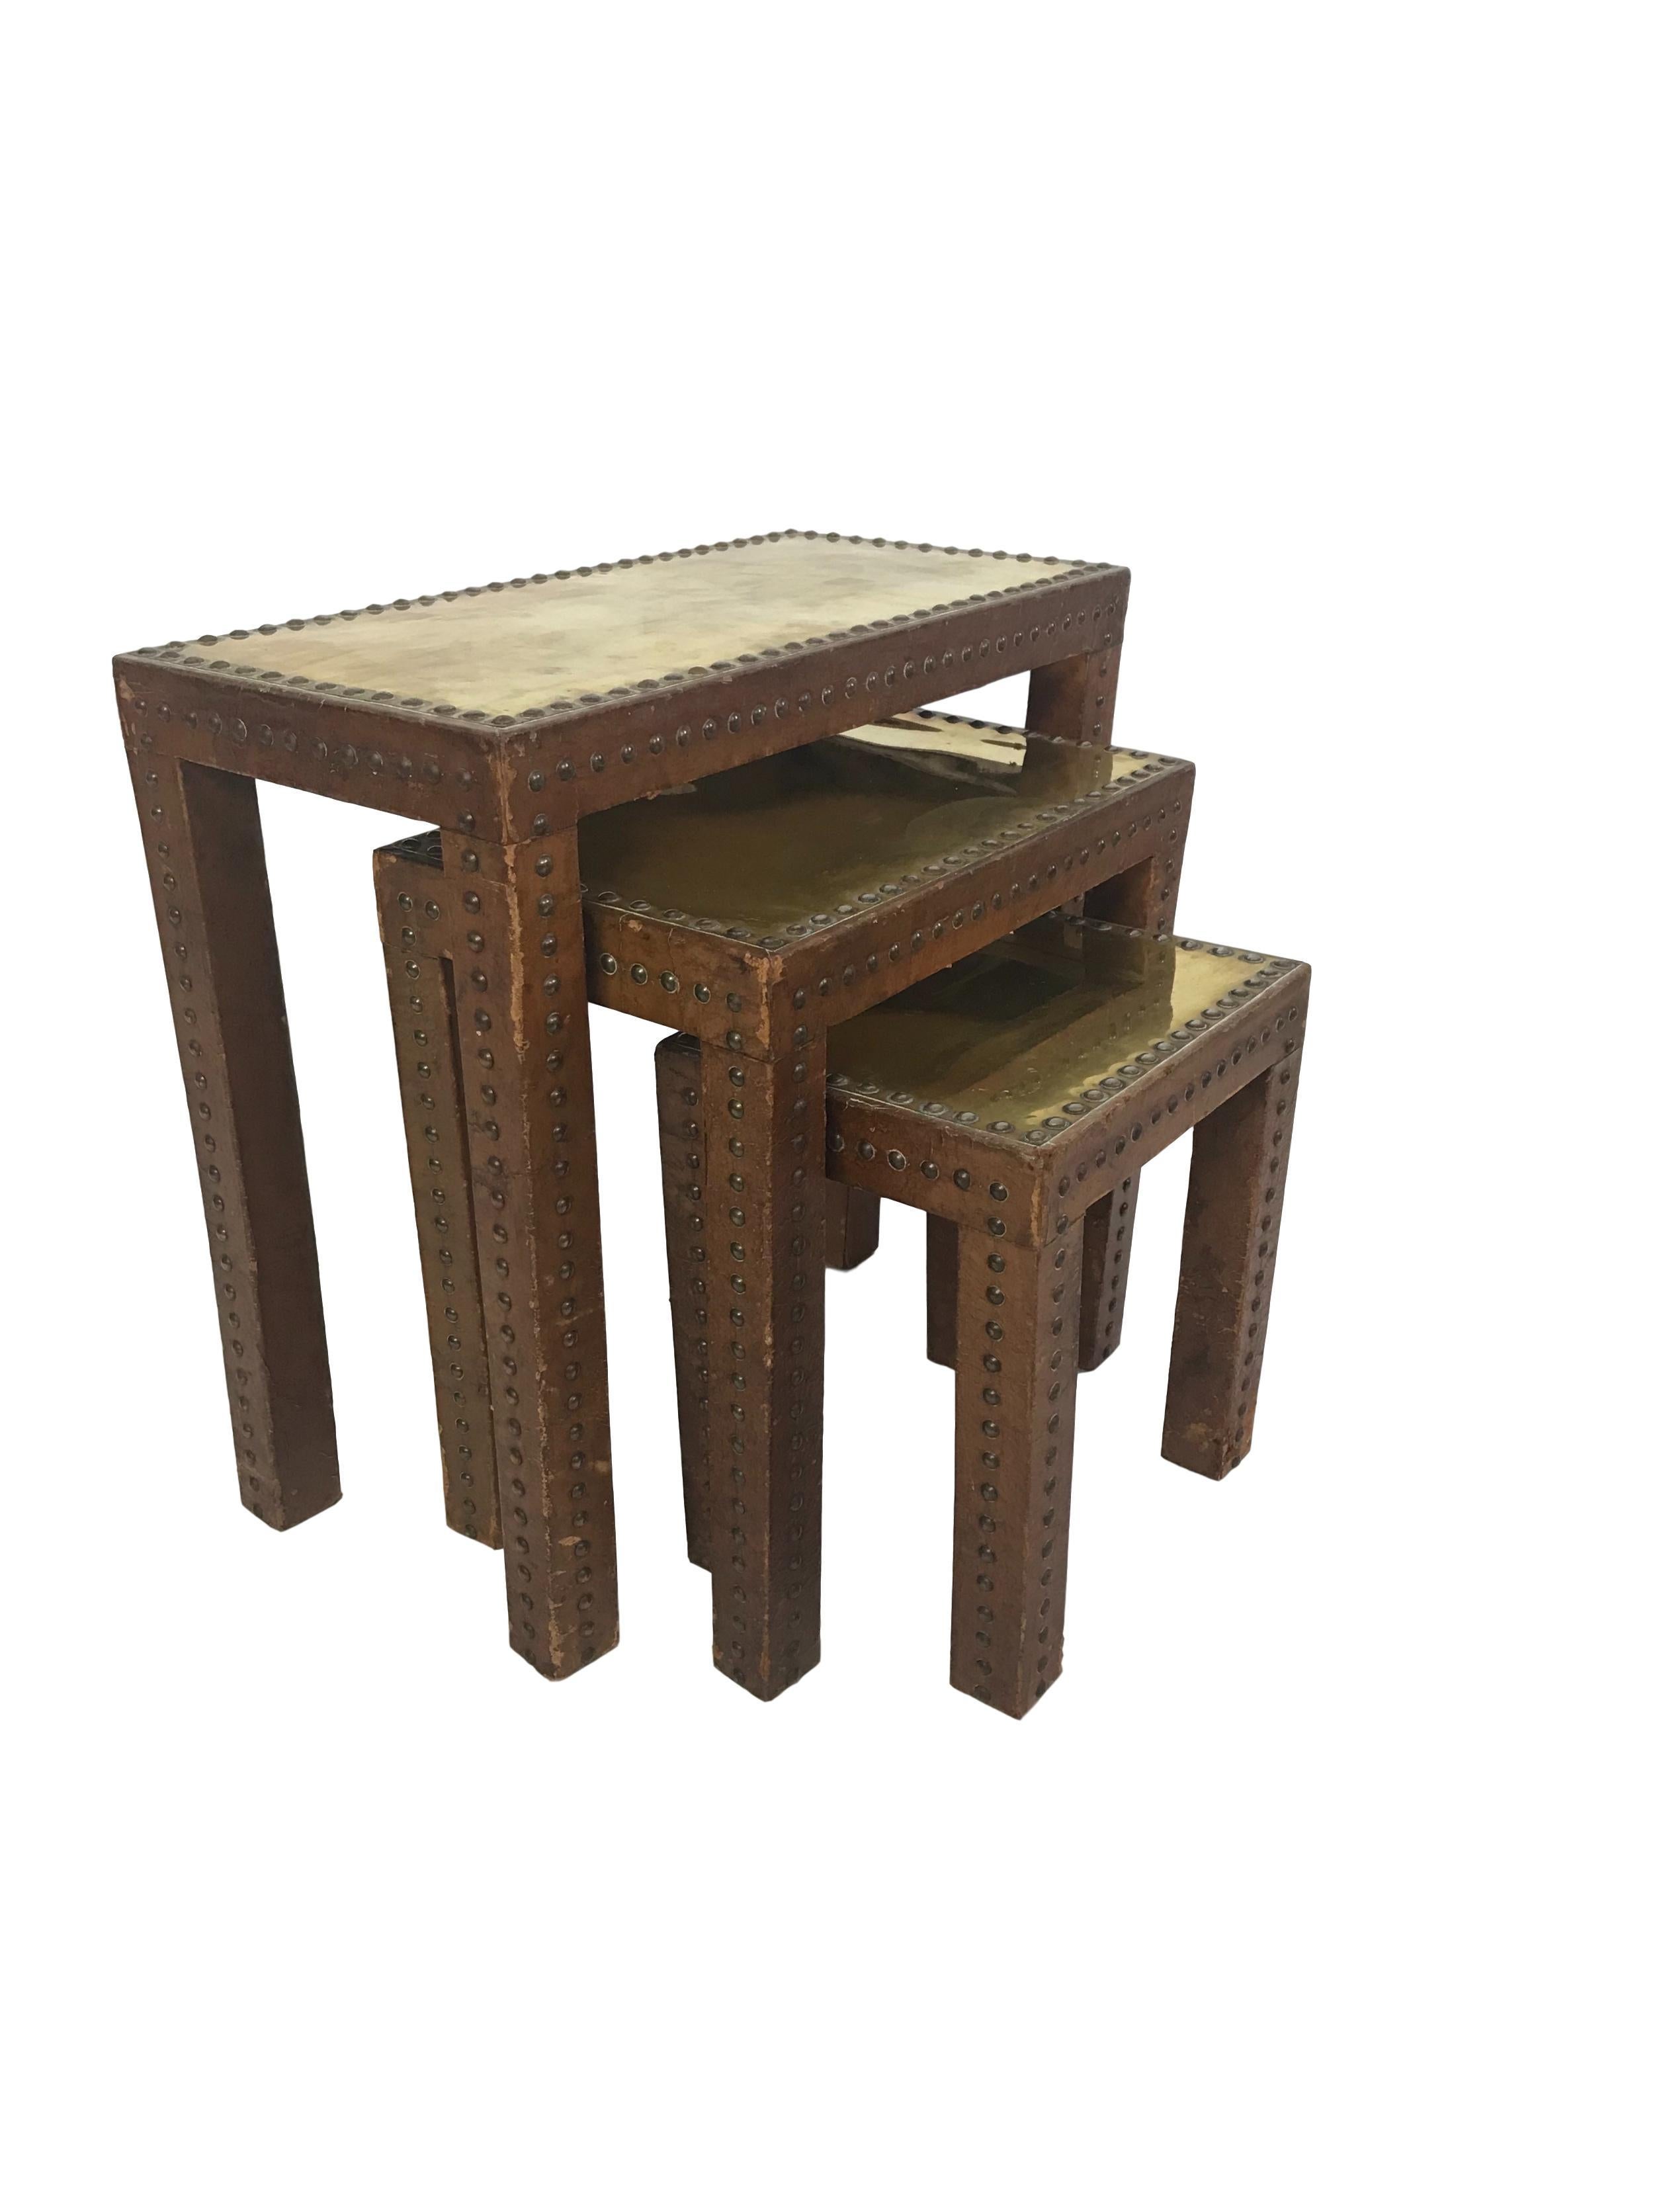 This is a fantastic one of a kind set of leather and brass studded nesting tables. The tables are wrapped in a worn rich colored cognac leather with brass studs that adorn the legs and tops. The table tops are made of brass plates held in place by